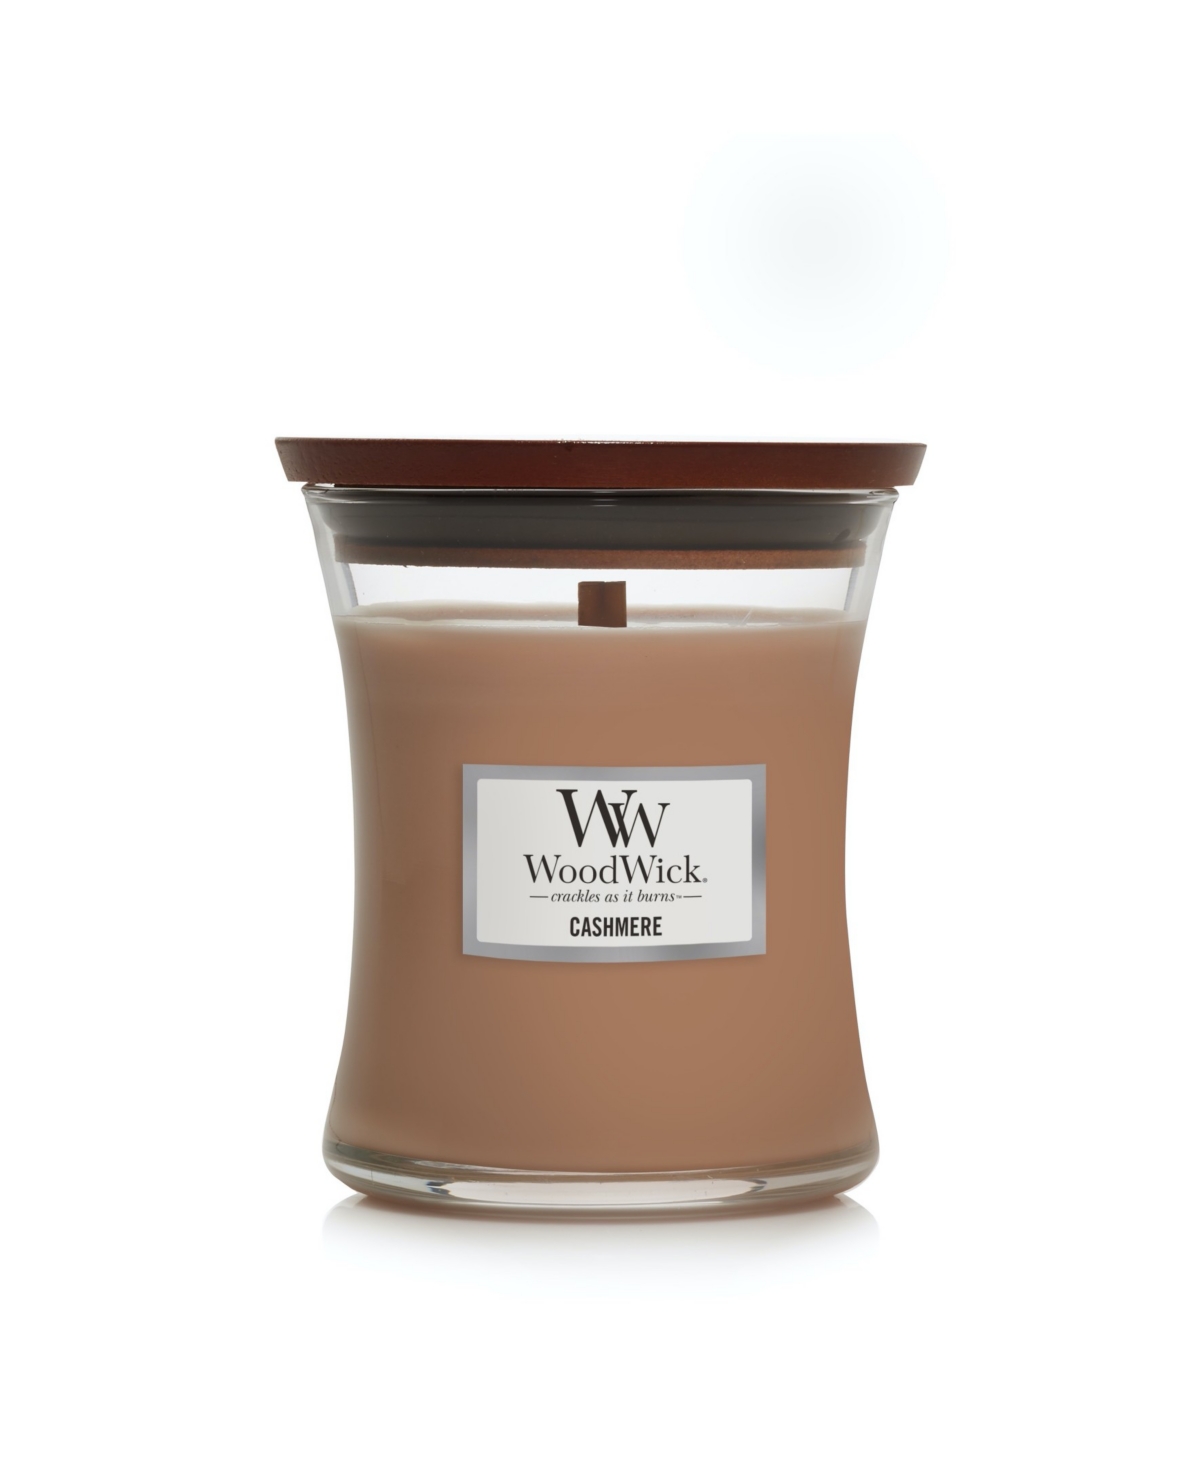 Shop Woodwick Candle Woodwick Cashmere Medium Hourglass Candle, 9.7 oz